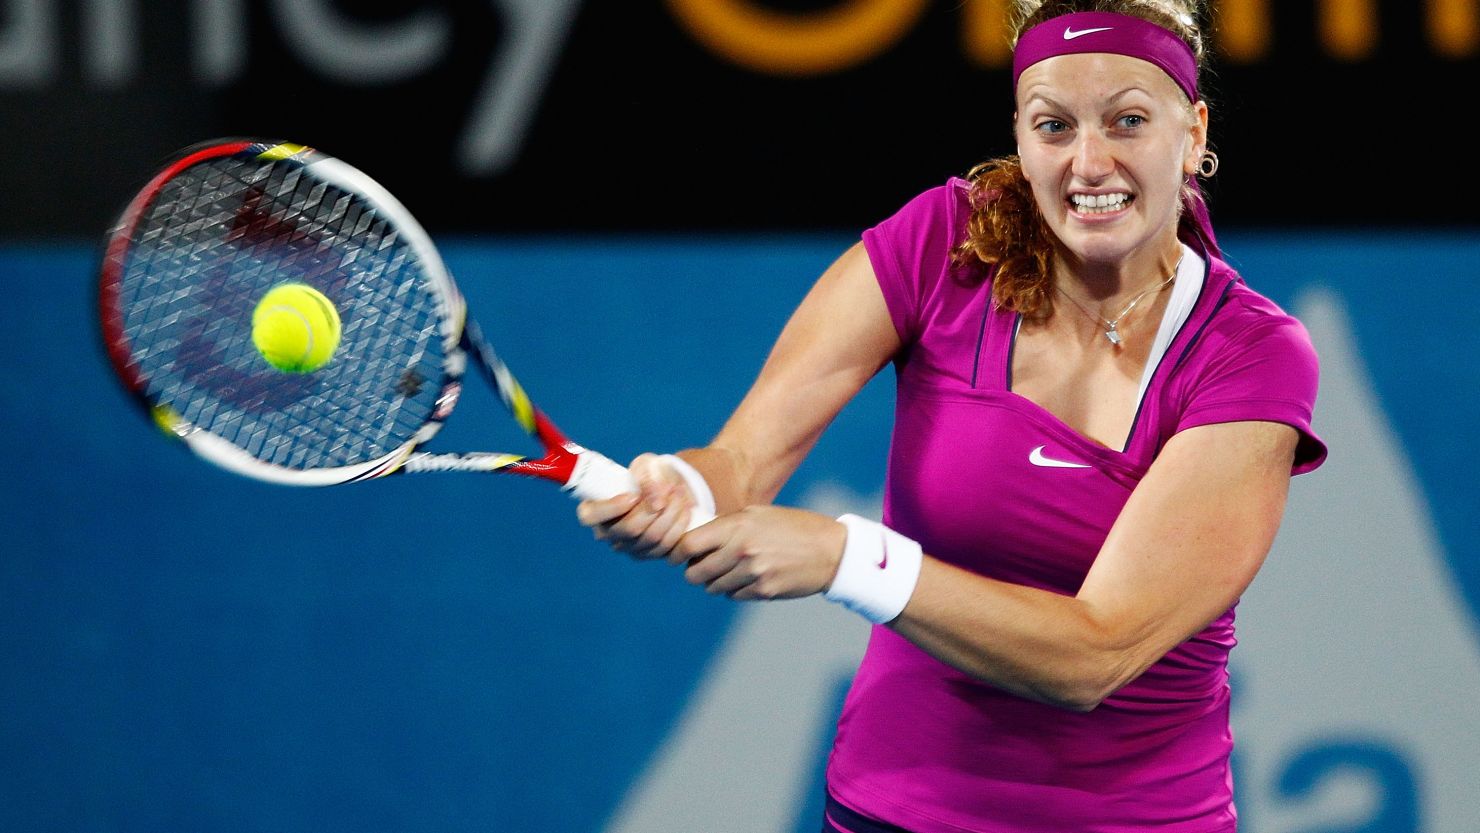 Czech rising star Petra Kvitova claimed the first grand slam title of her career at Wimbledon in July last year.